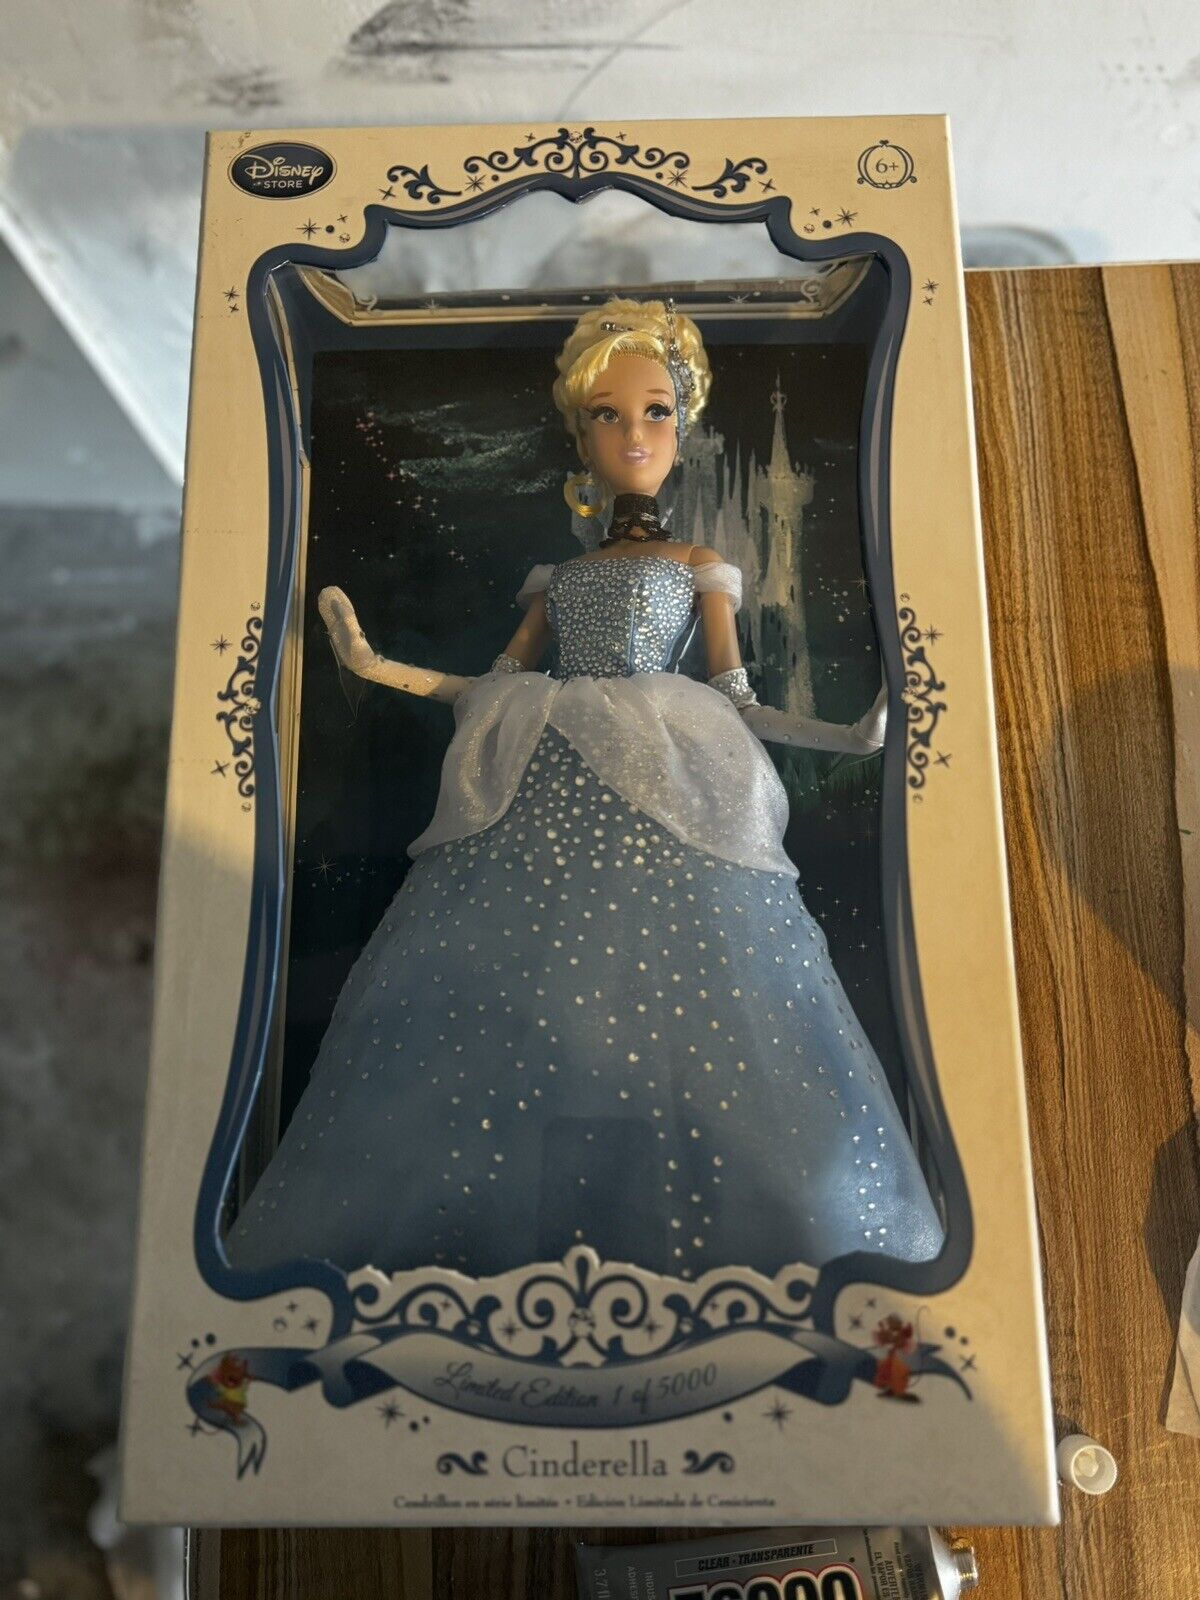 Disney Store Limited Edition Cinderella Doll 17” 1 out of 5000 (RARE)